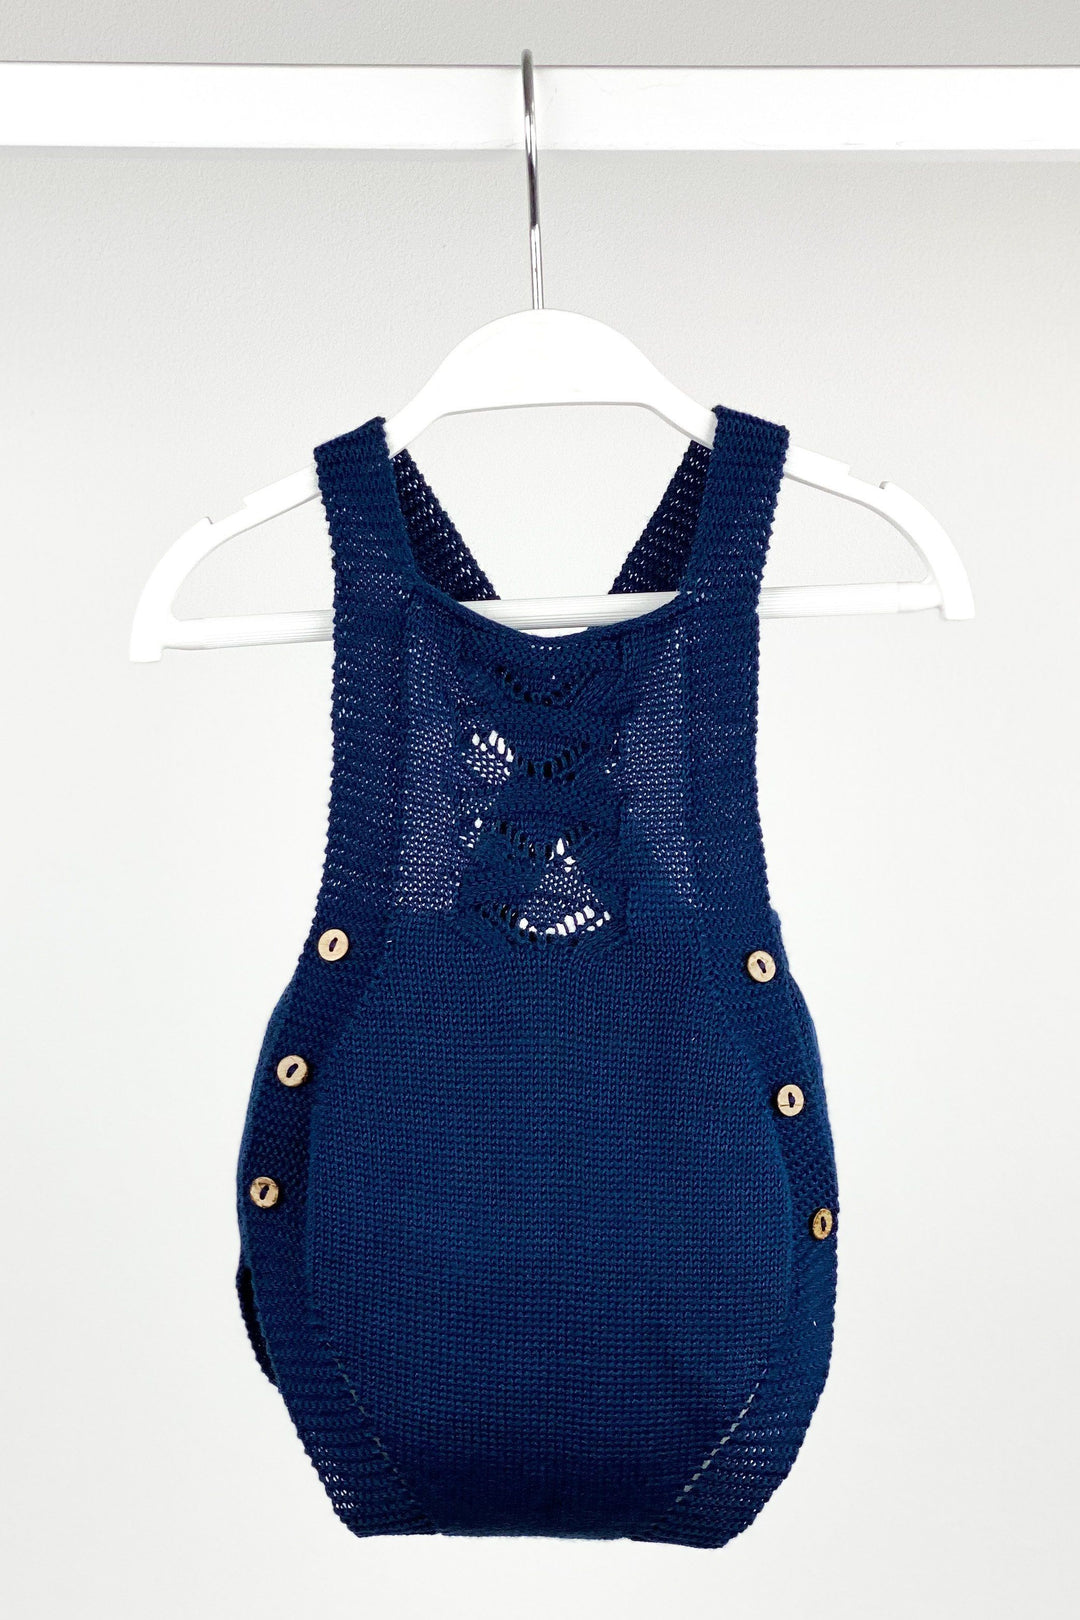 Mac Ilusión "Ace" Navy Blue Knitted Dungaree Romper | iphoneandroidapplications